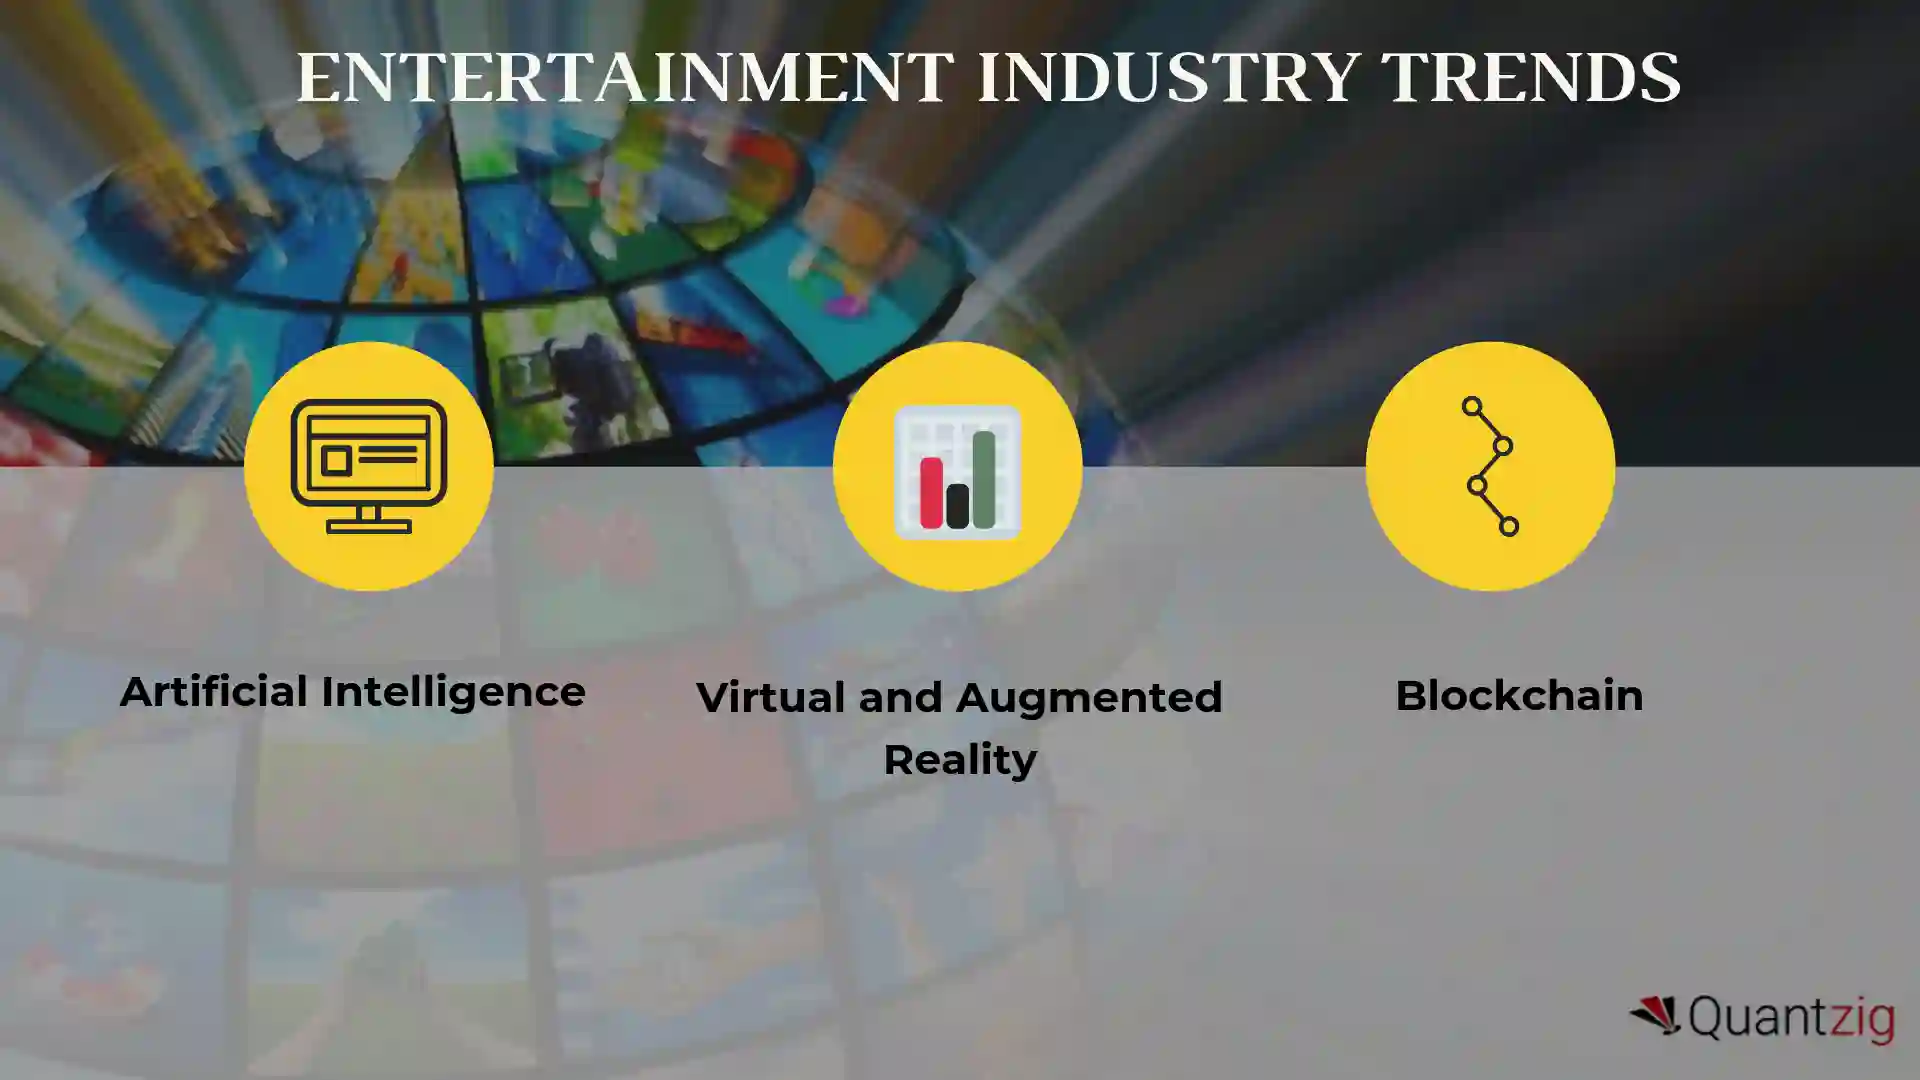 The Top 3 Entertainment Trends of 2010